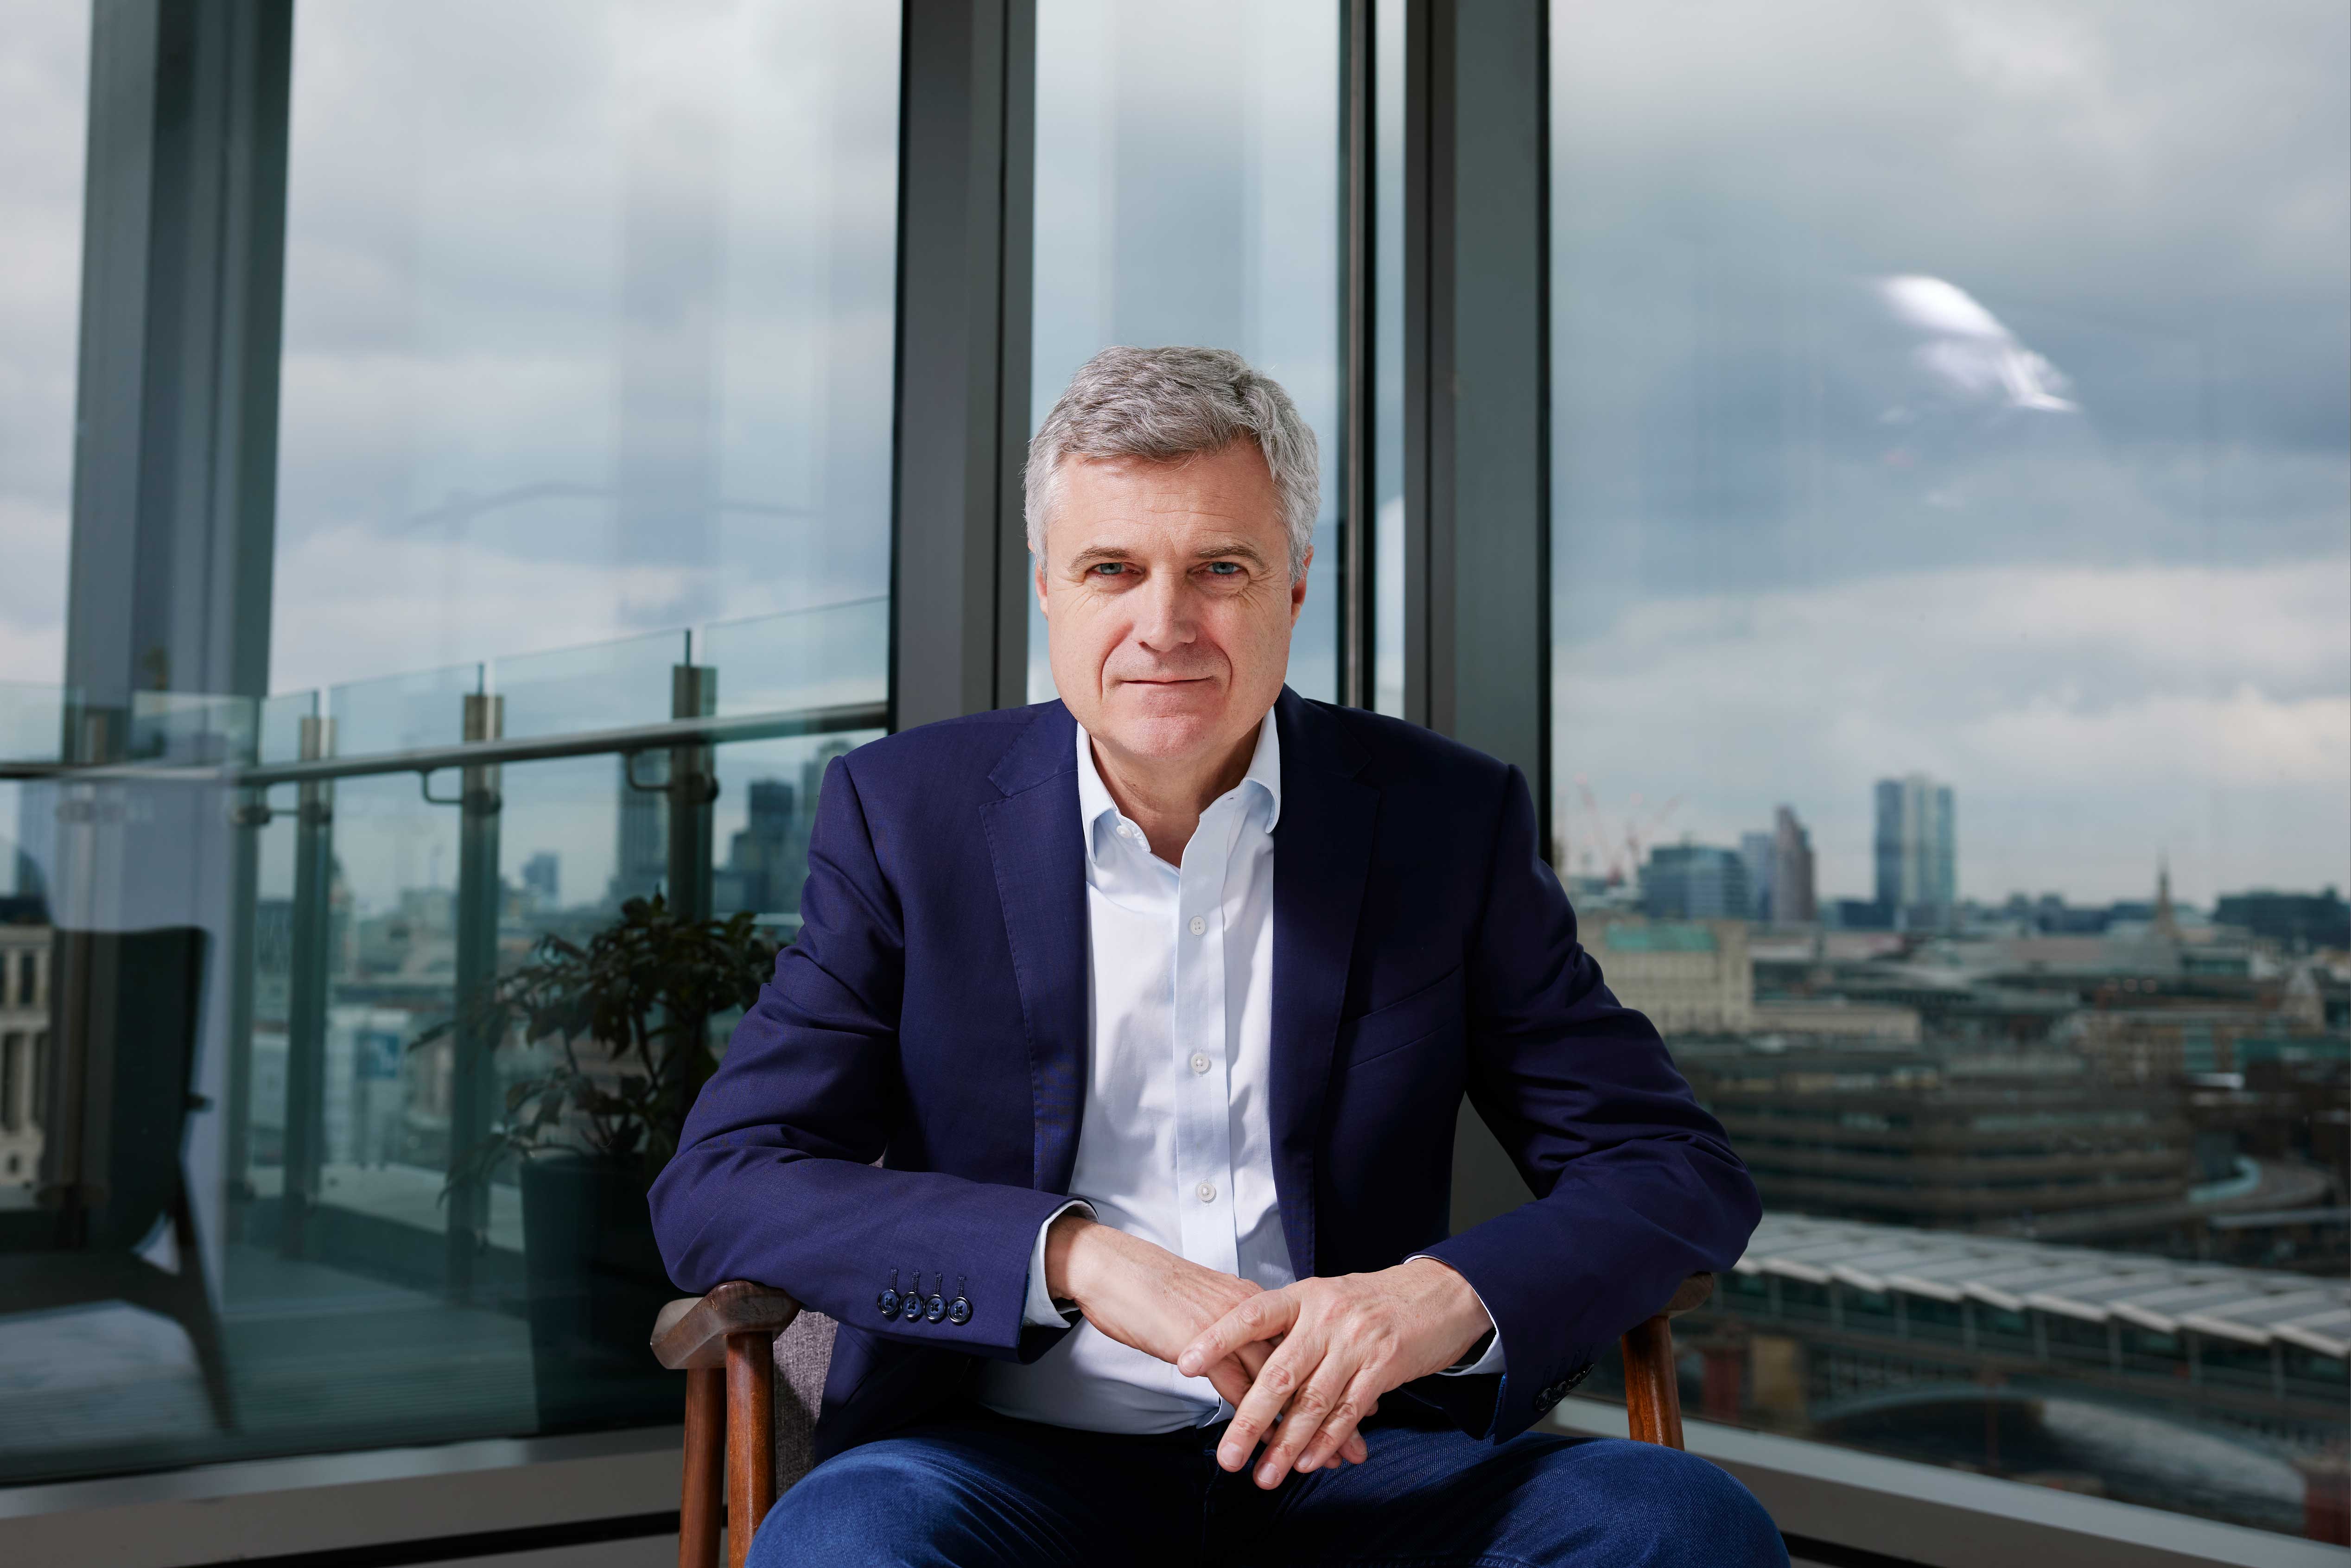 WPP CEO Mark Read sitting in front of London skyline